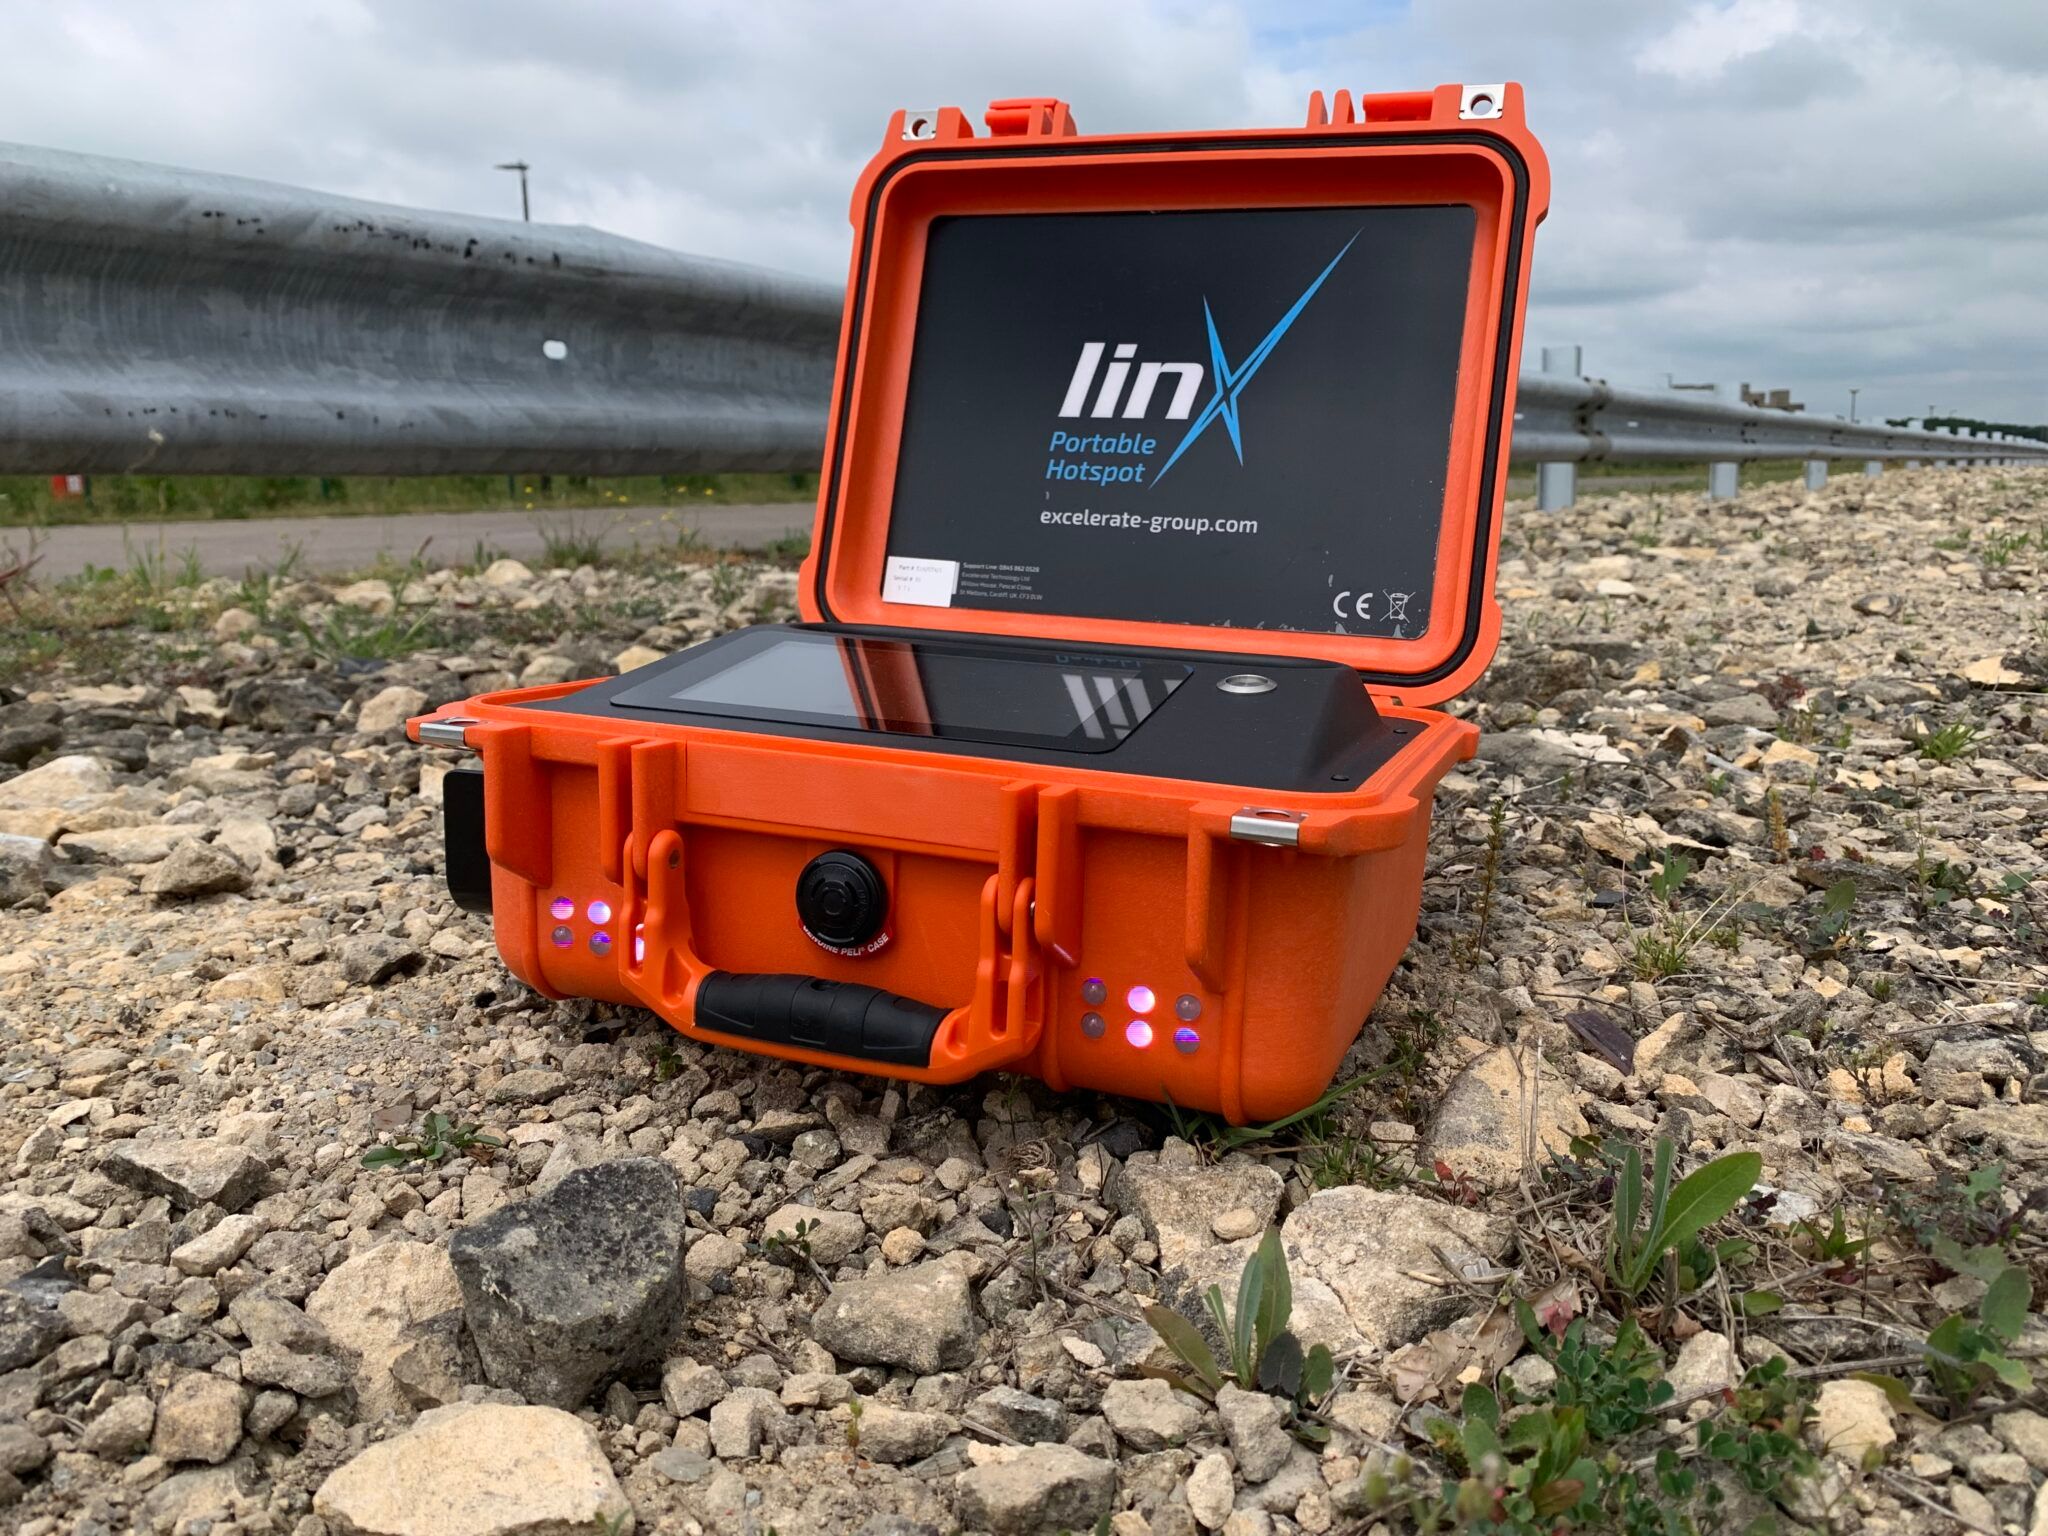 From high-rises to coastlines: Linx Hub enables connectivity anywhere